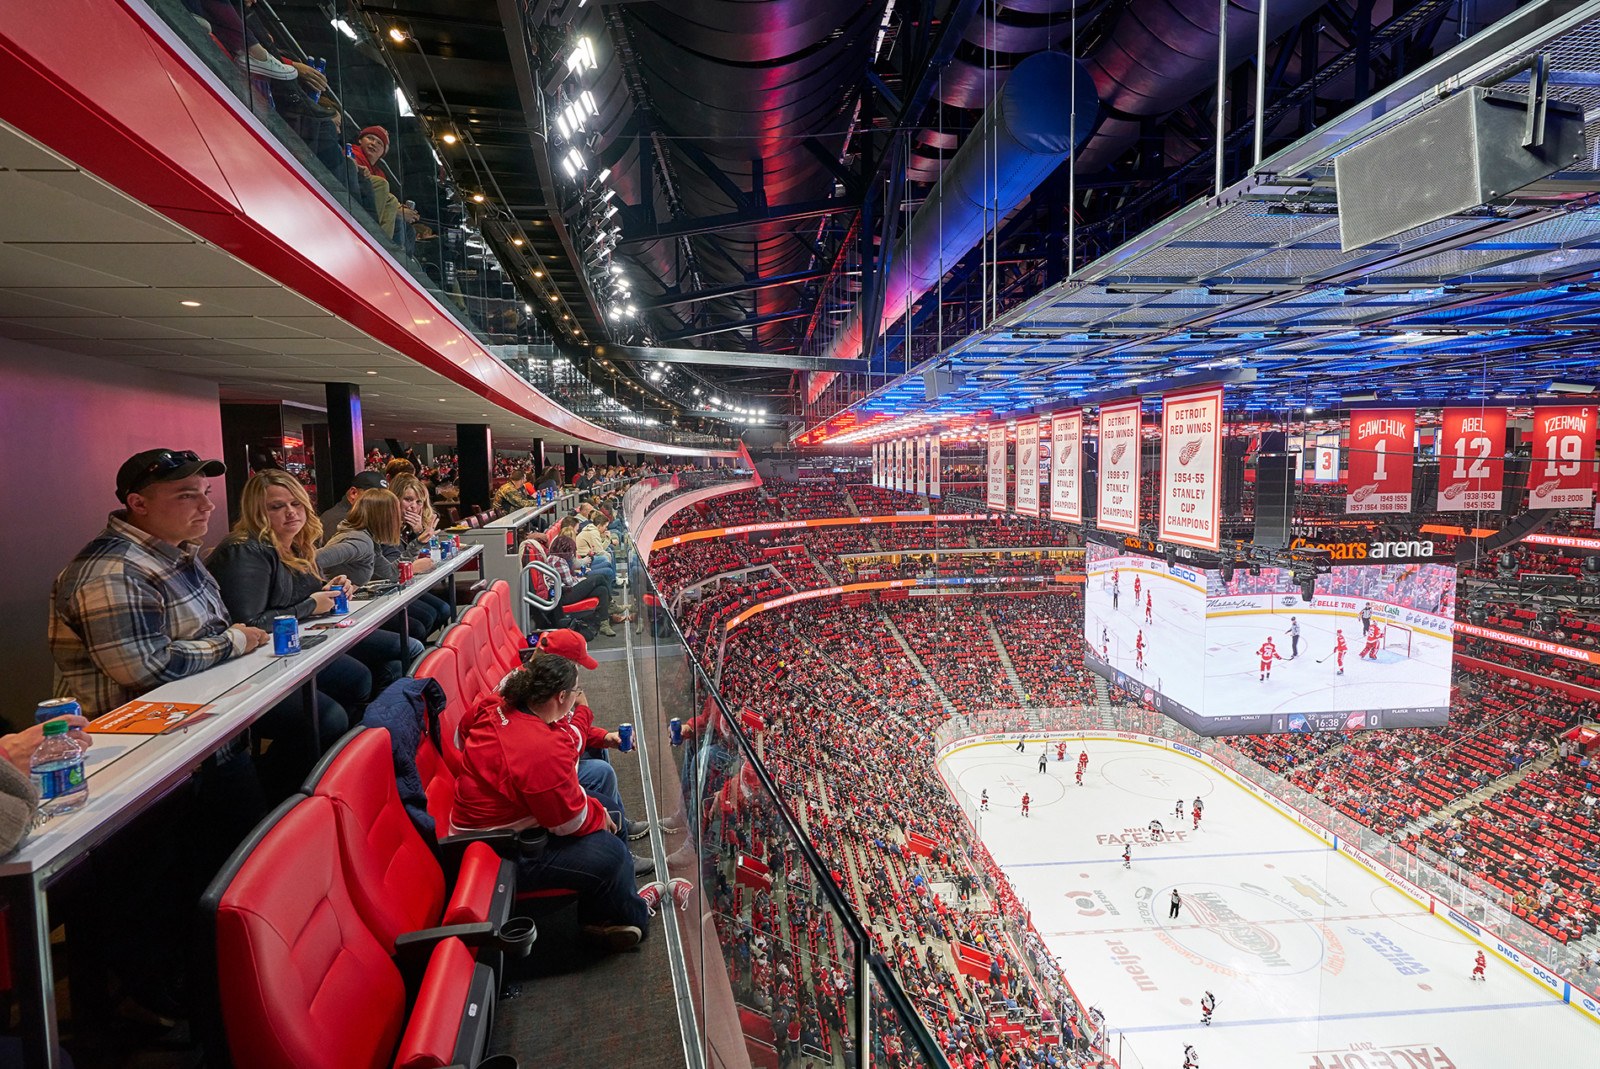 Seat view reviews from little caesars arena, home of Detroit Pistons,  Detroit Red Wings